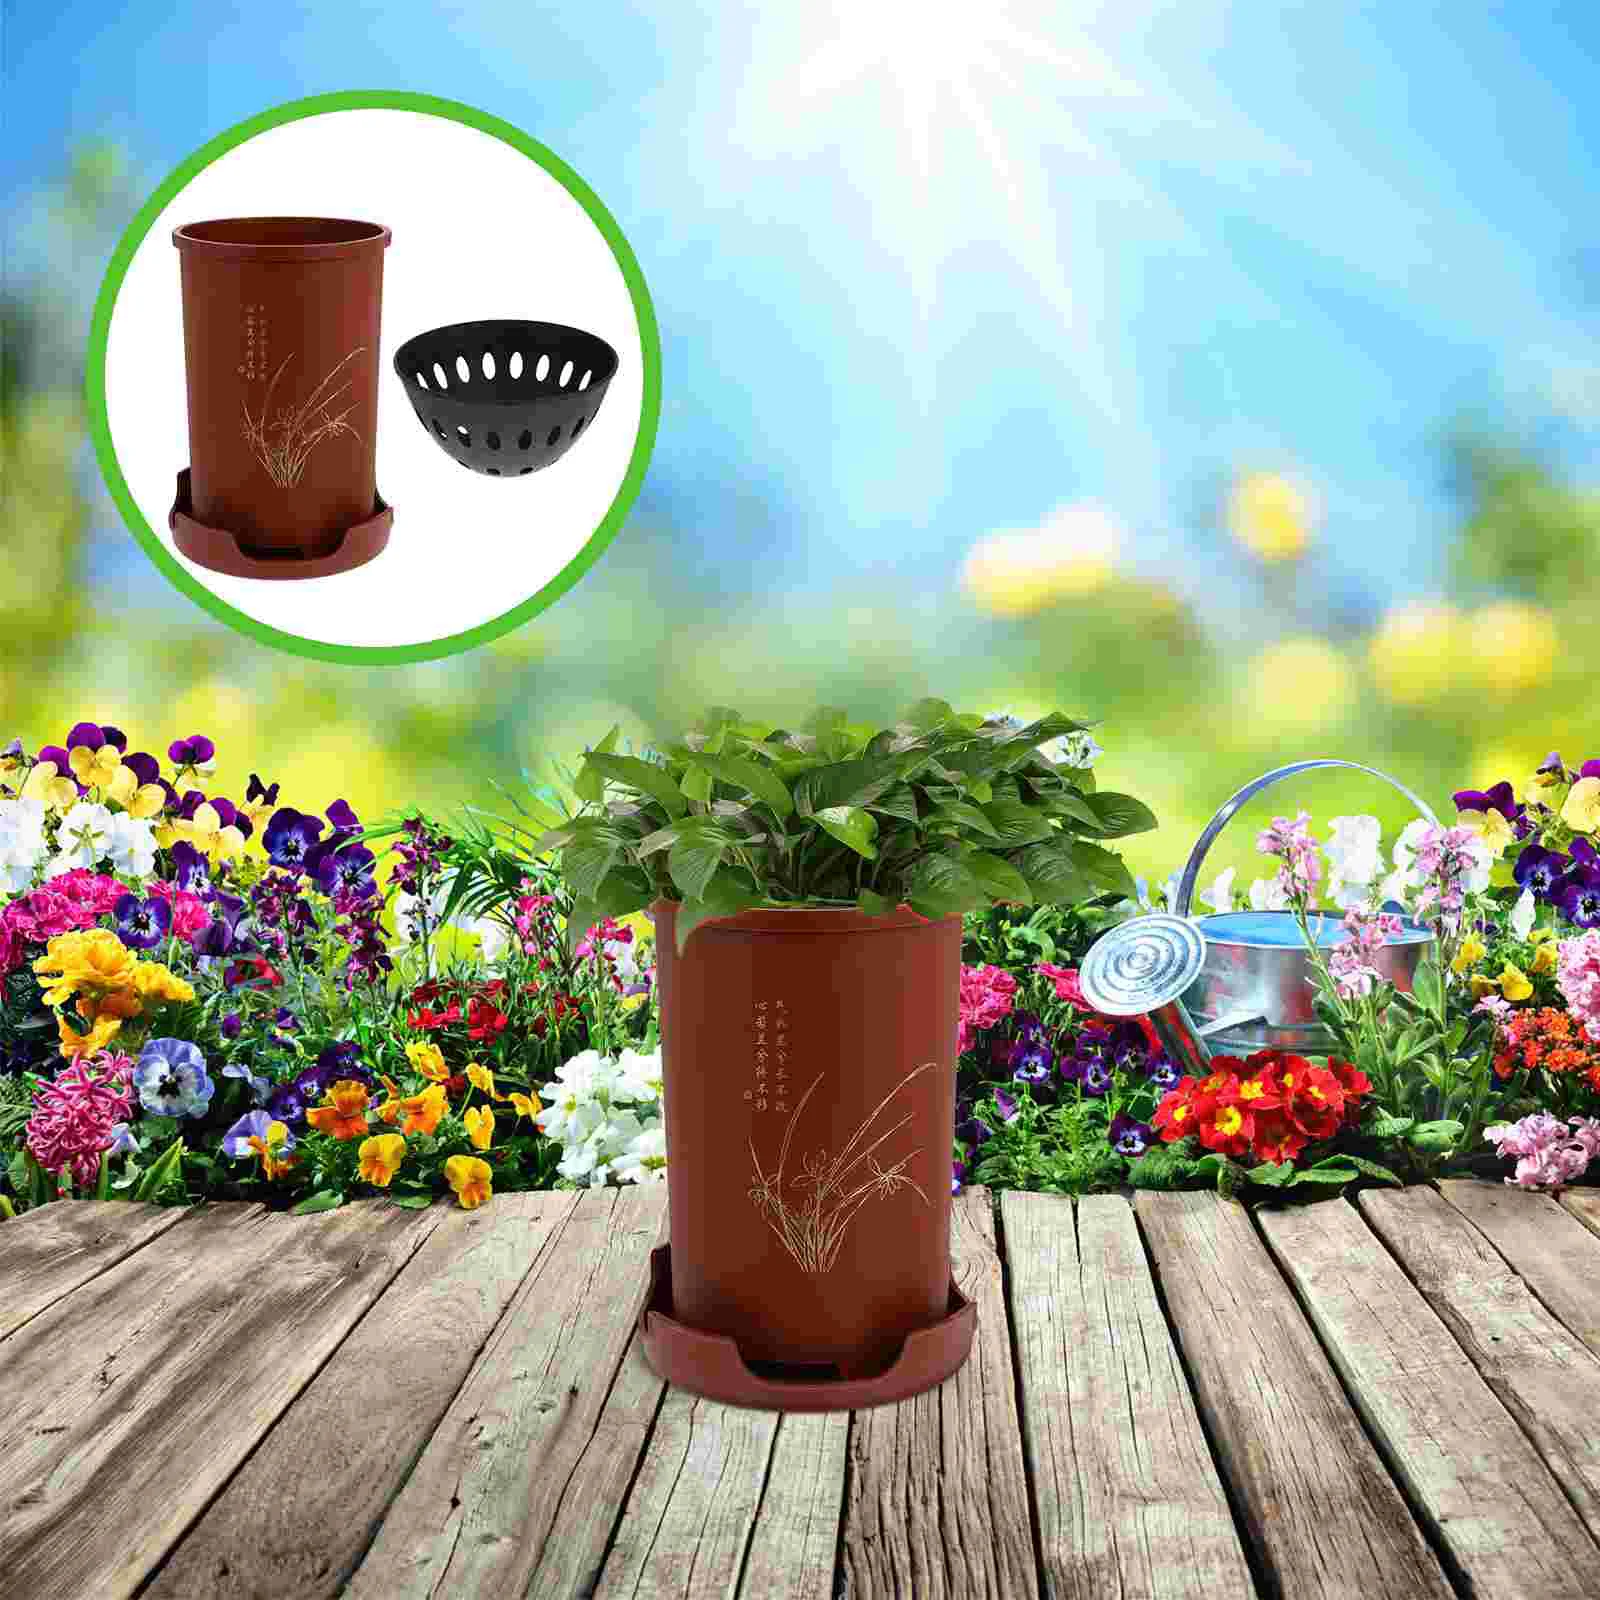 

Pots Pot Orchid Flower Planter Planters Outdoor Indoor Decor Holes Spring Drainage Resin Vase Tall Slotted Succulent Saucer